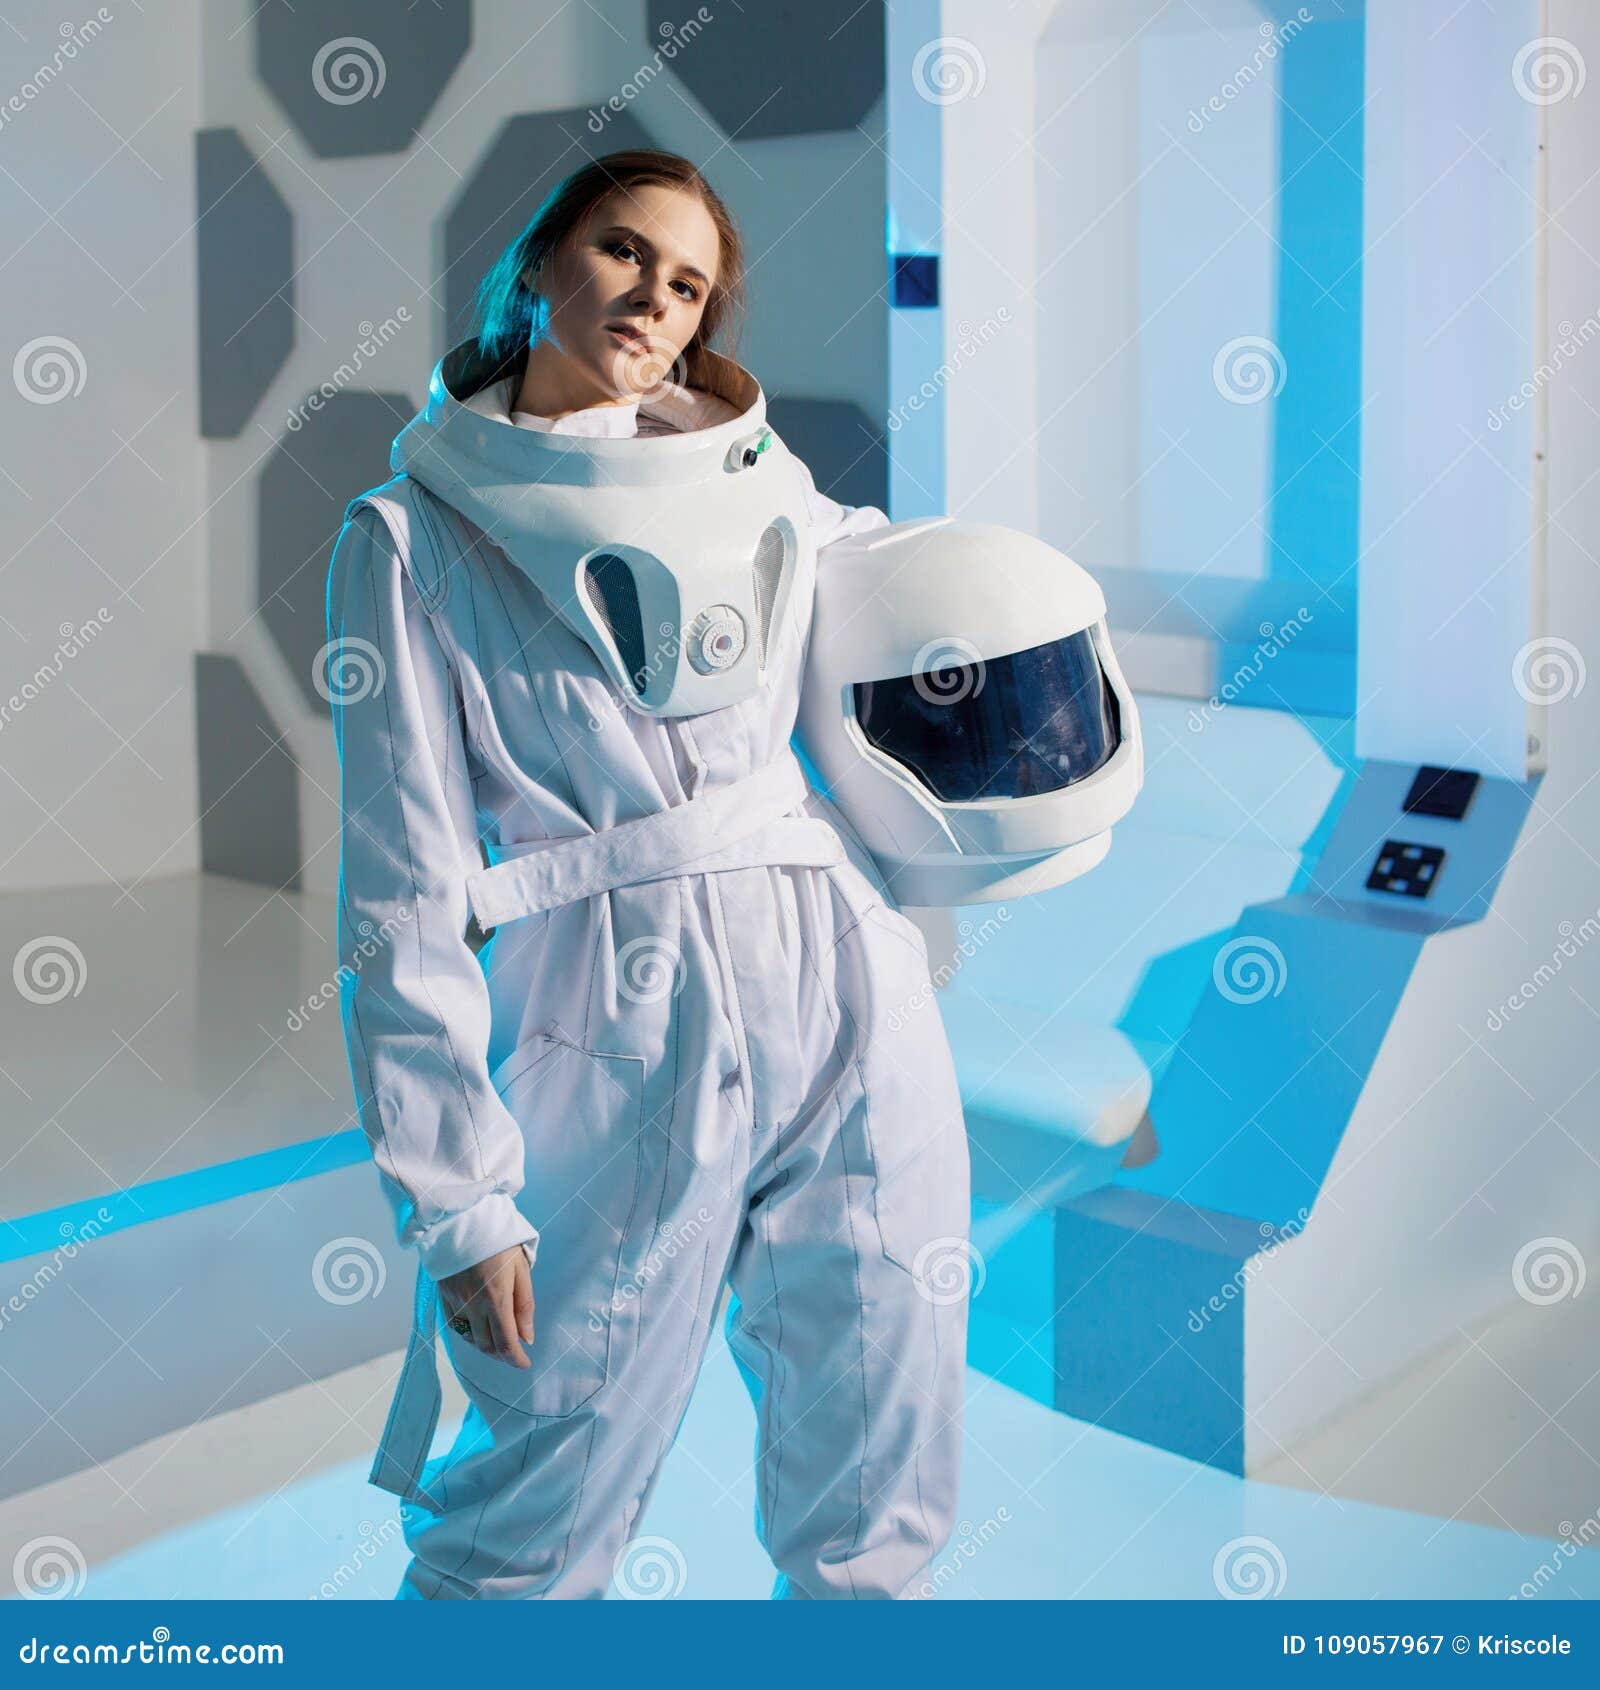 Rendering Woman Tech Futuristic Spacesuit Stock Photo by ©MerryDesigns  238001118